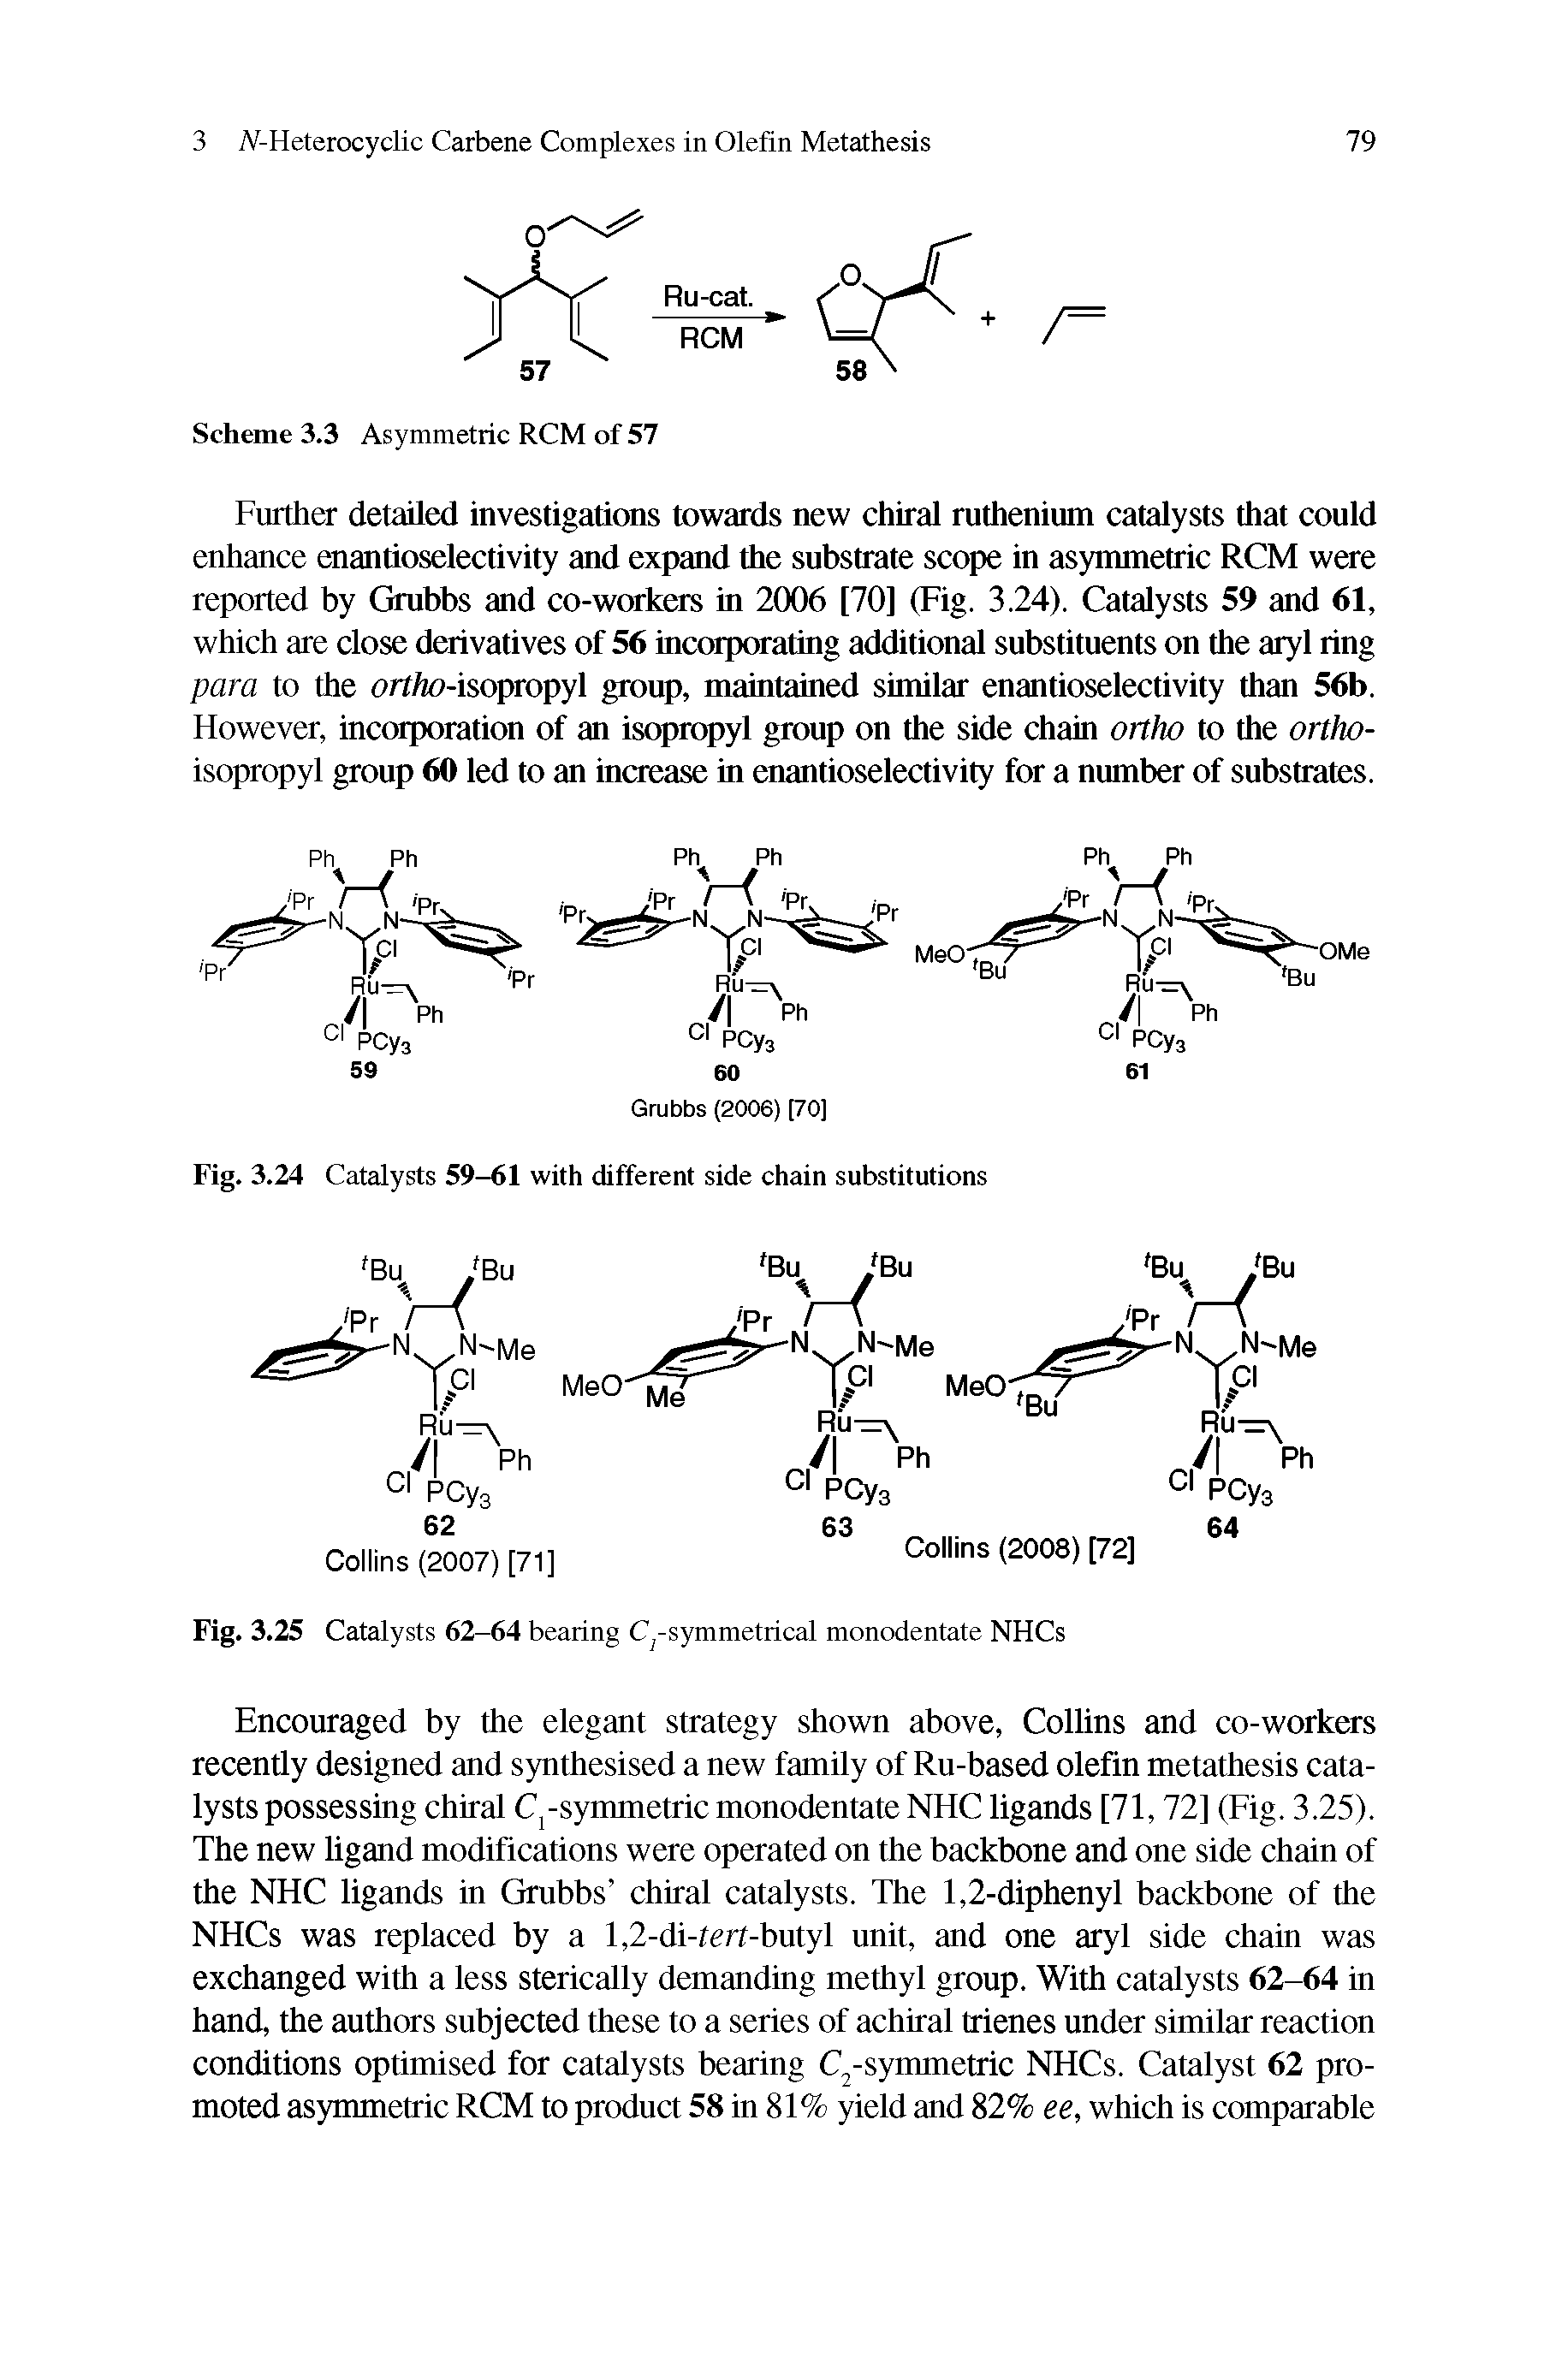 Fig. 3.24 Catalysts 59-61 with different side chain substitutions...